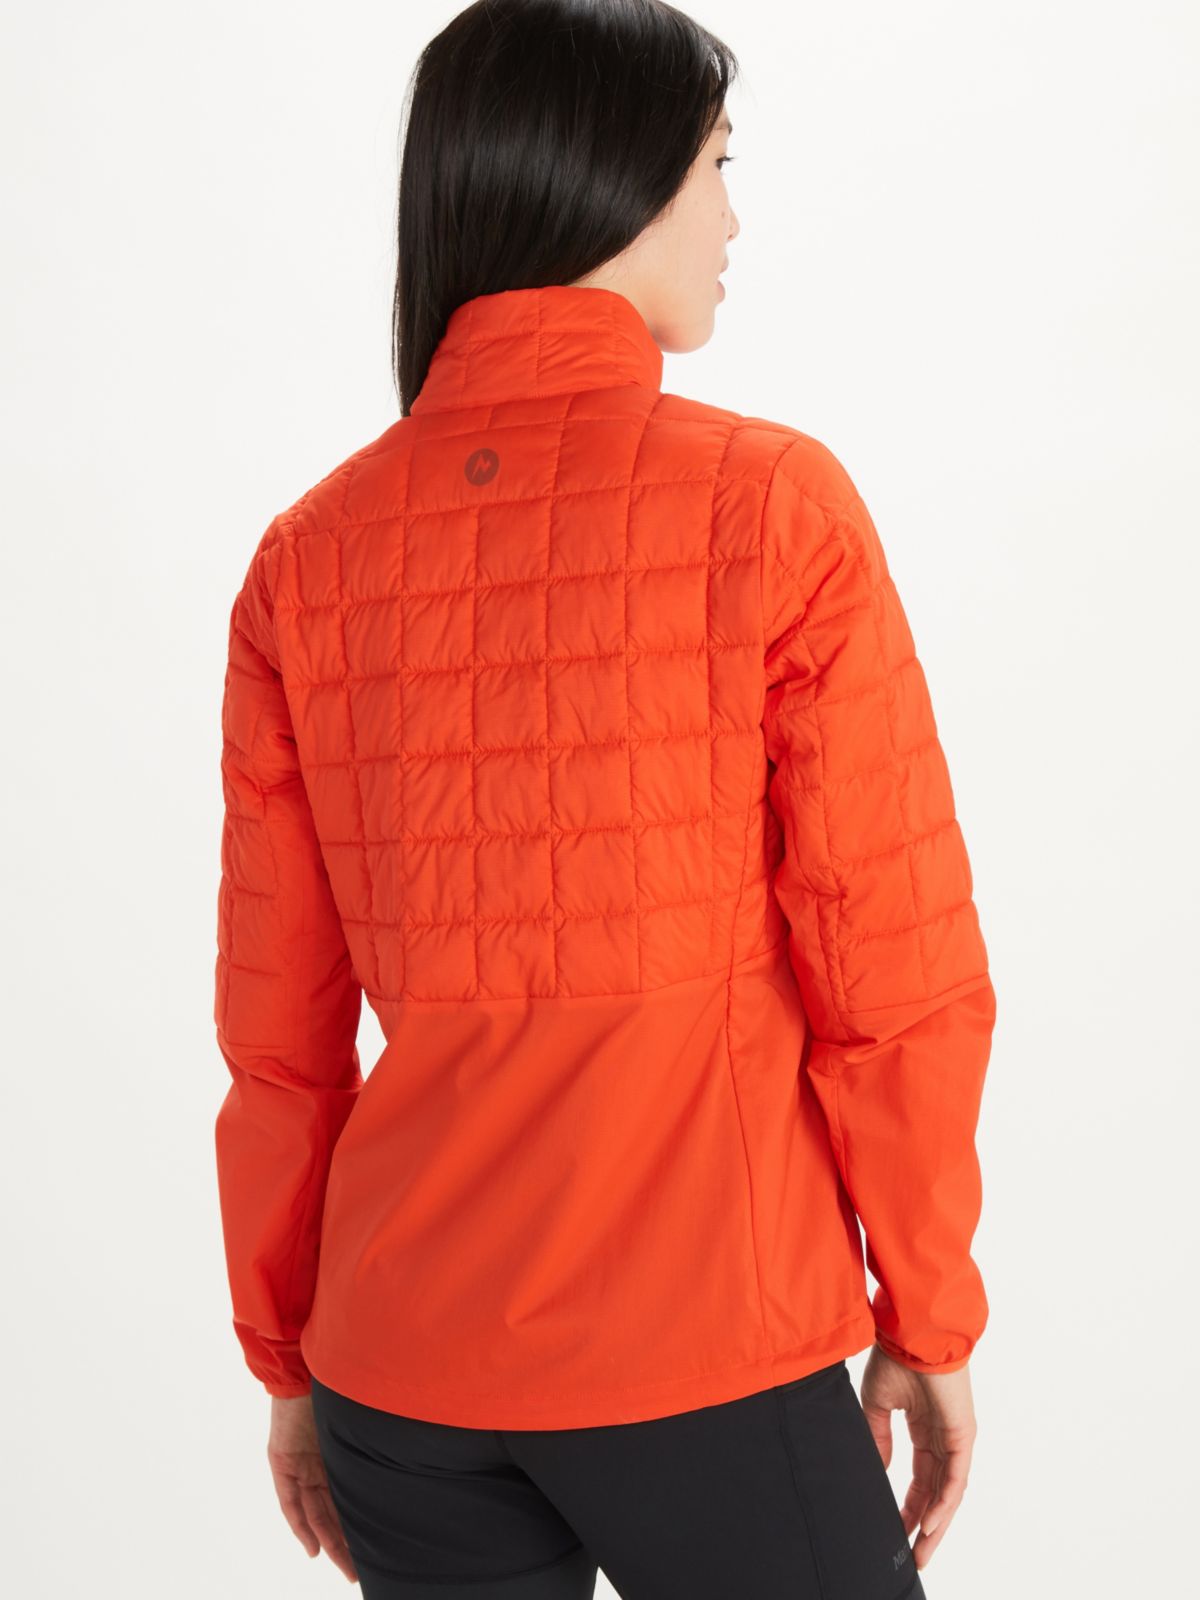 womens jacket being worn by model